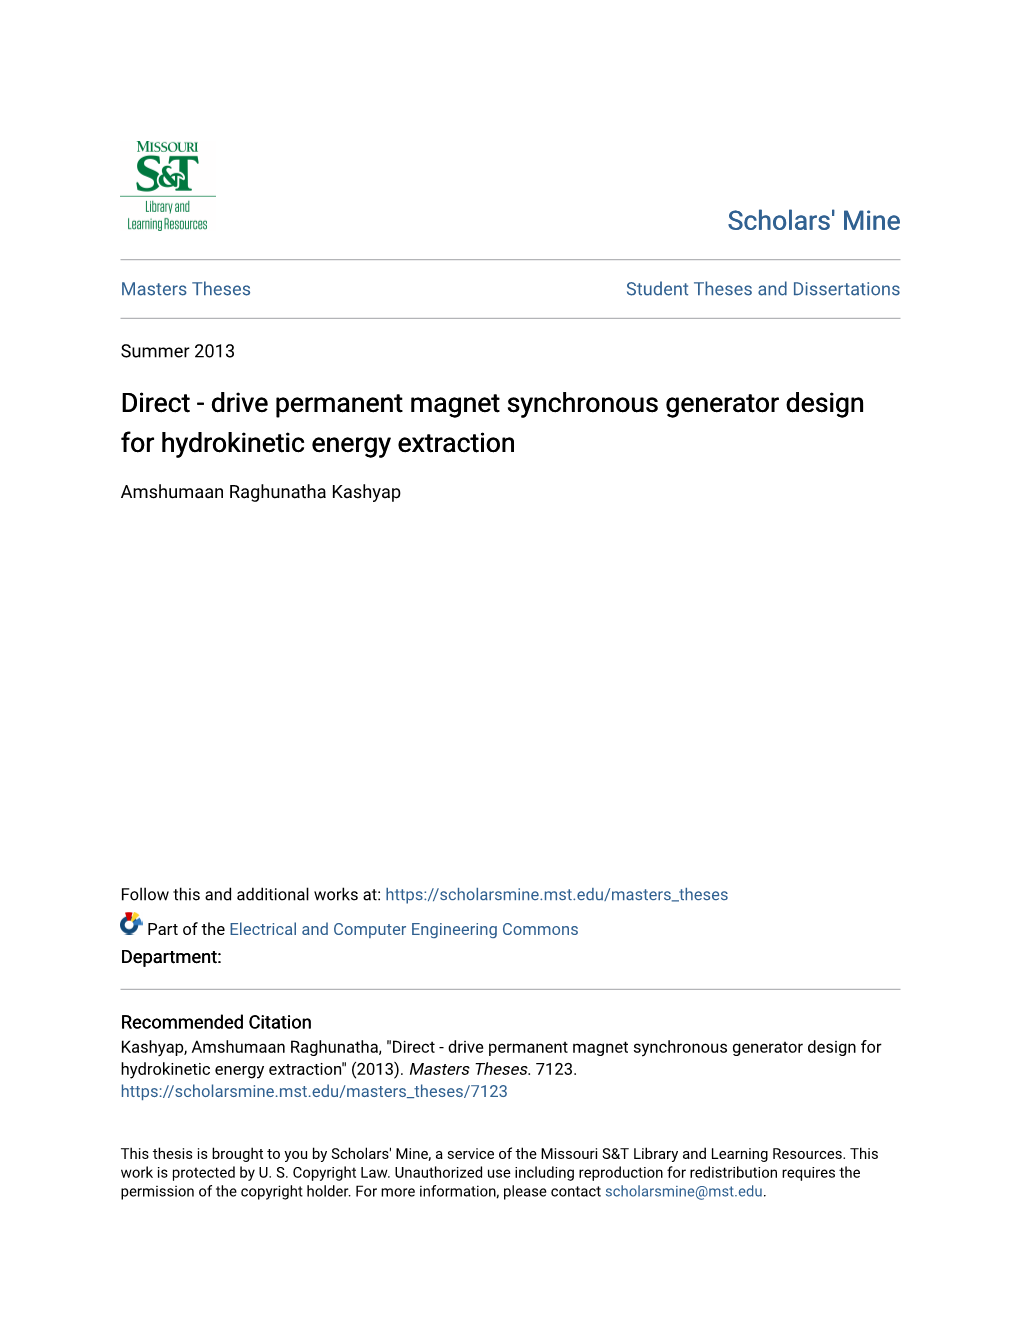 Drive Permanent Magnet Synchronous Generator Design for Hydrokinetic Energy Extraction